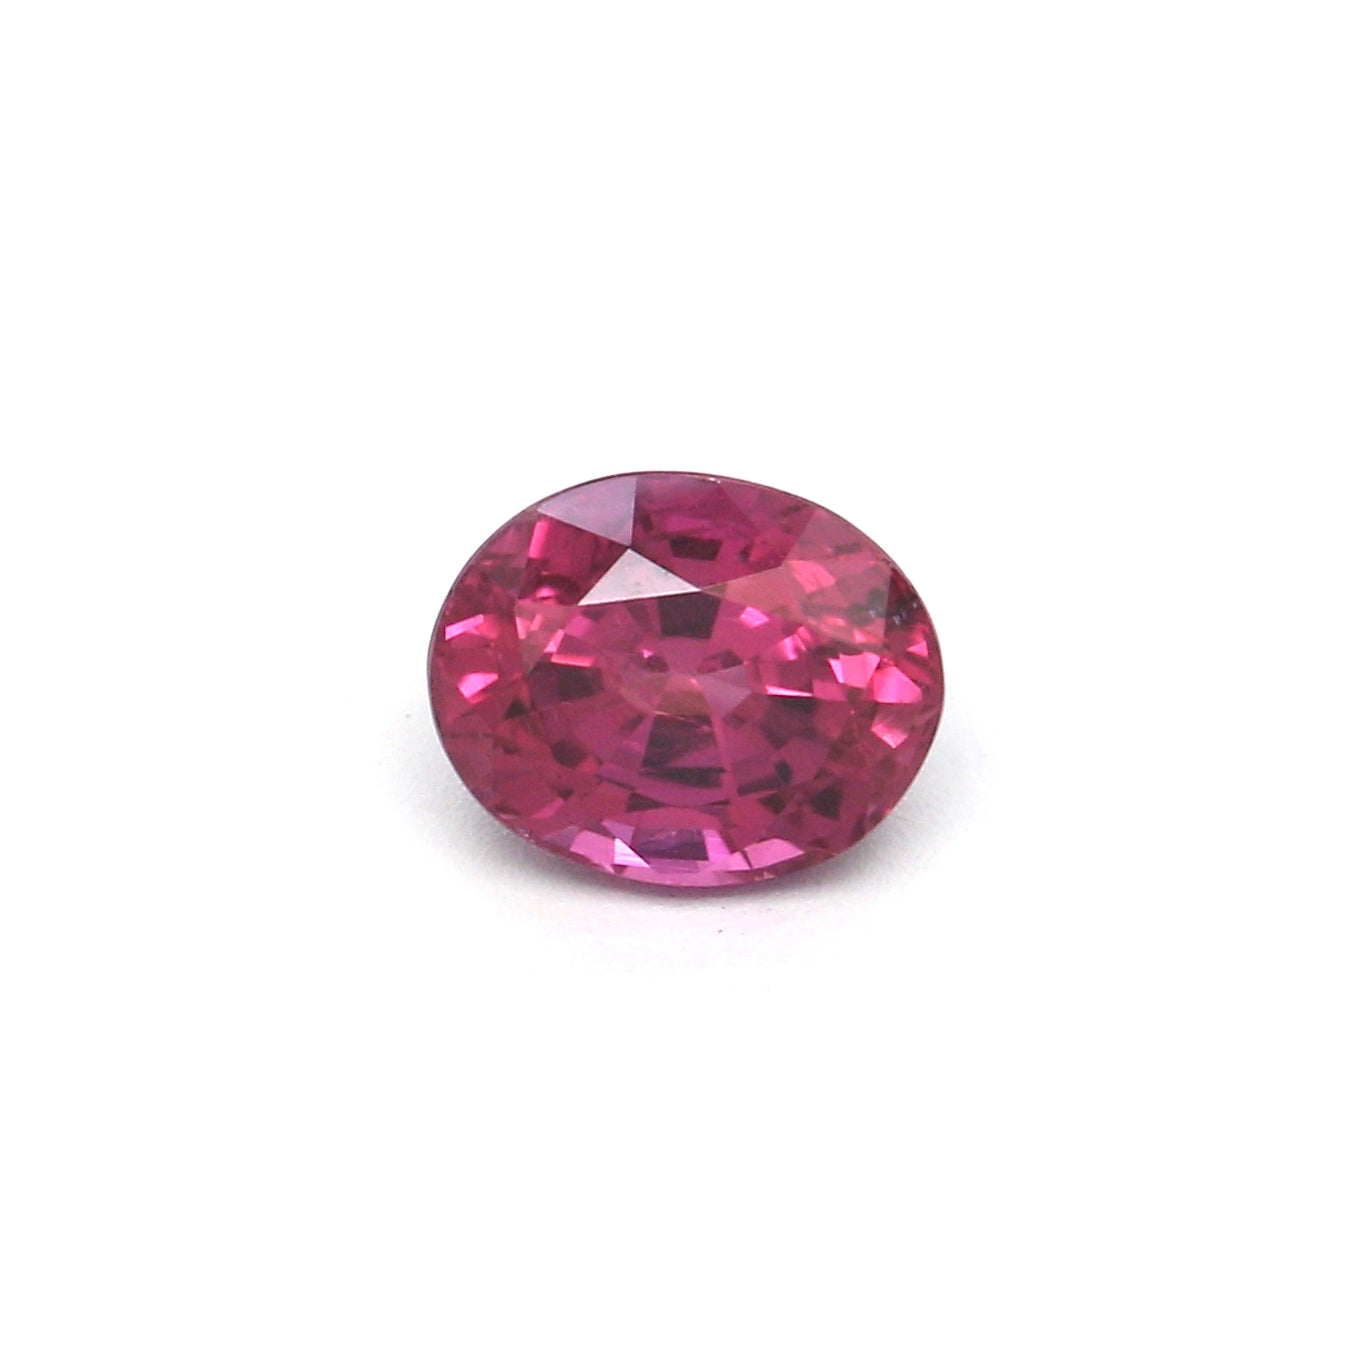 0.75ct Pink, Oval Sapphire, Heated, Thailand - 5.69 x 4.59 x 3.59mm